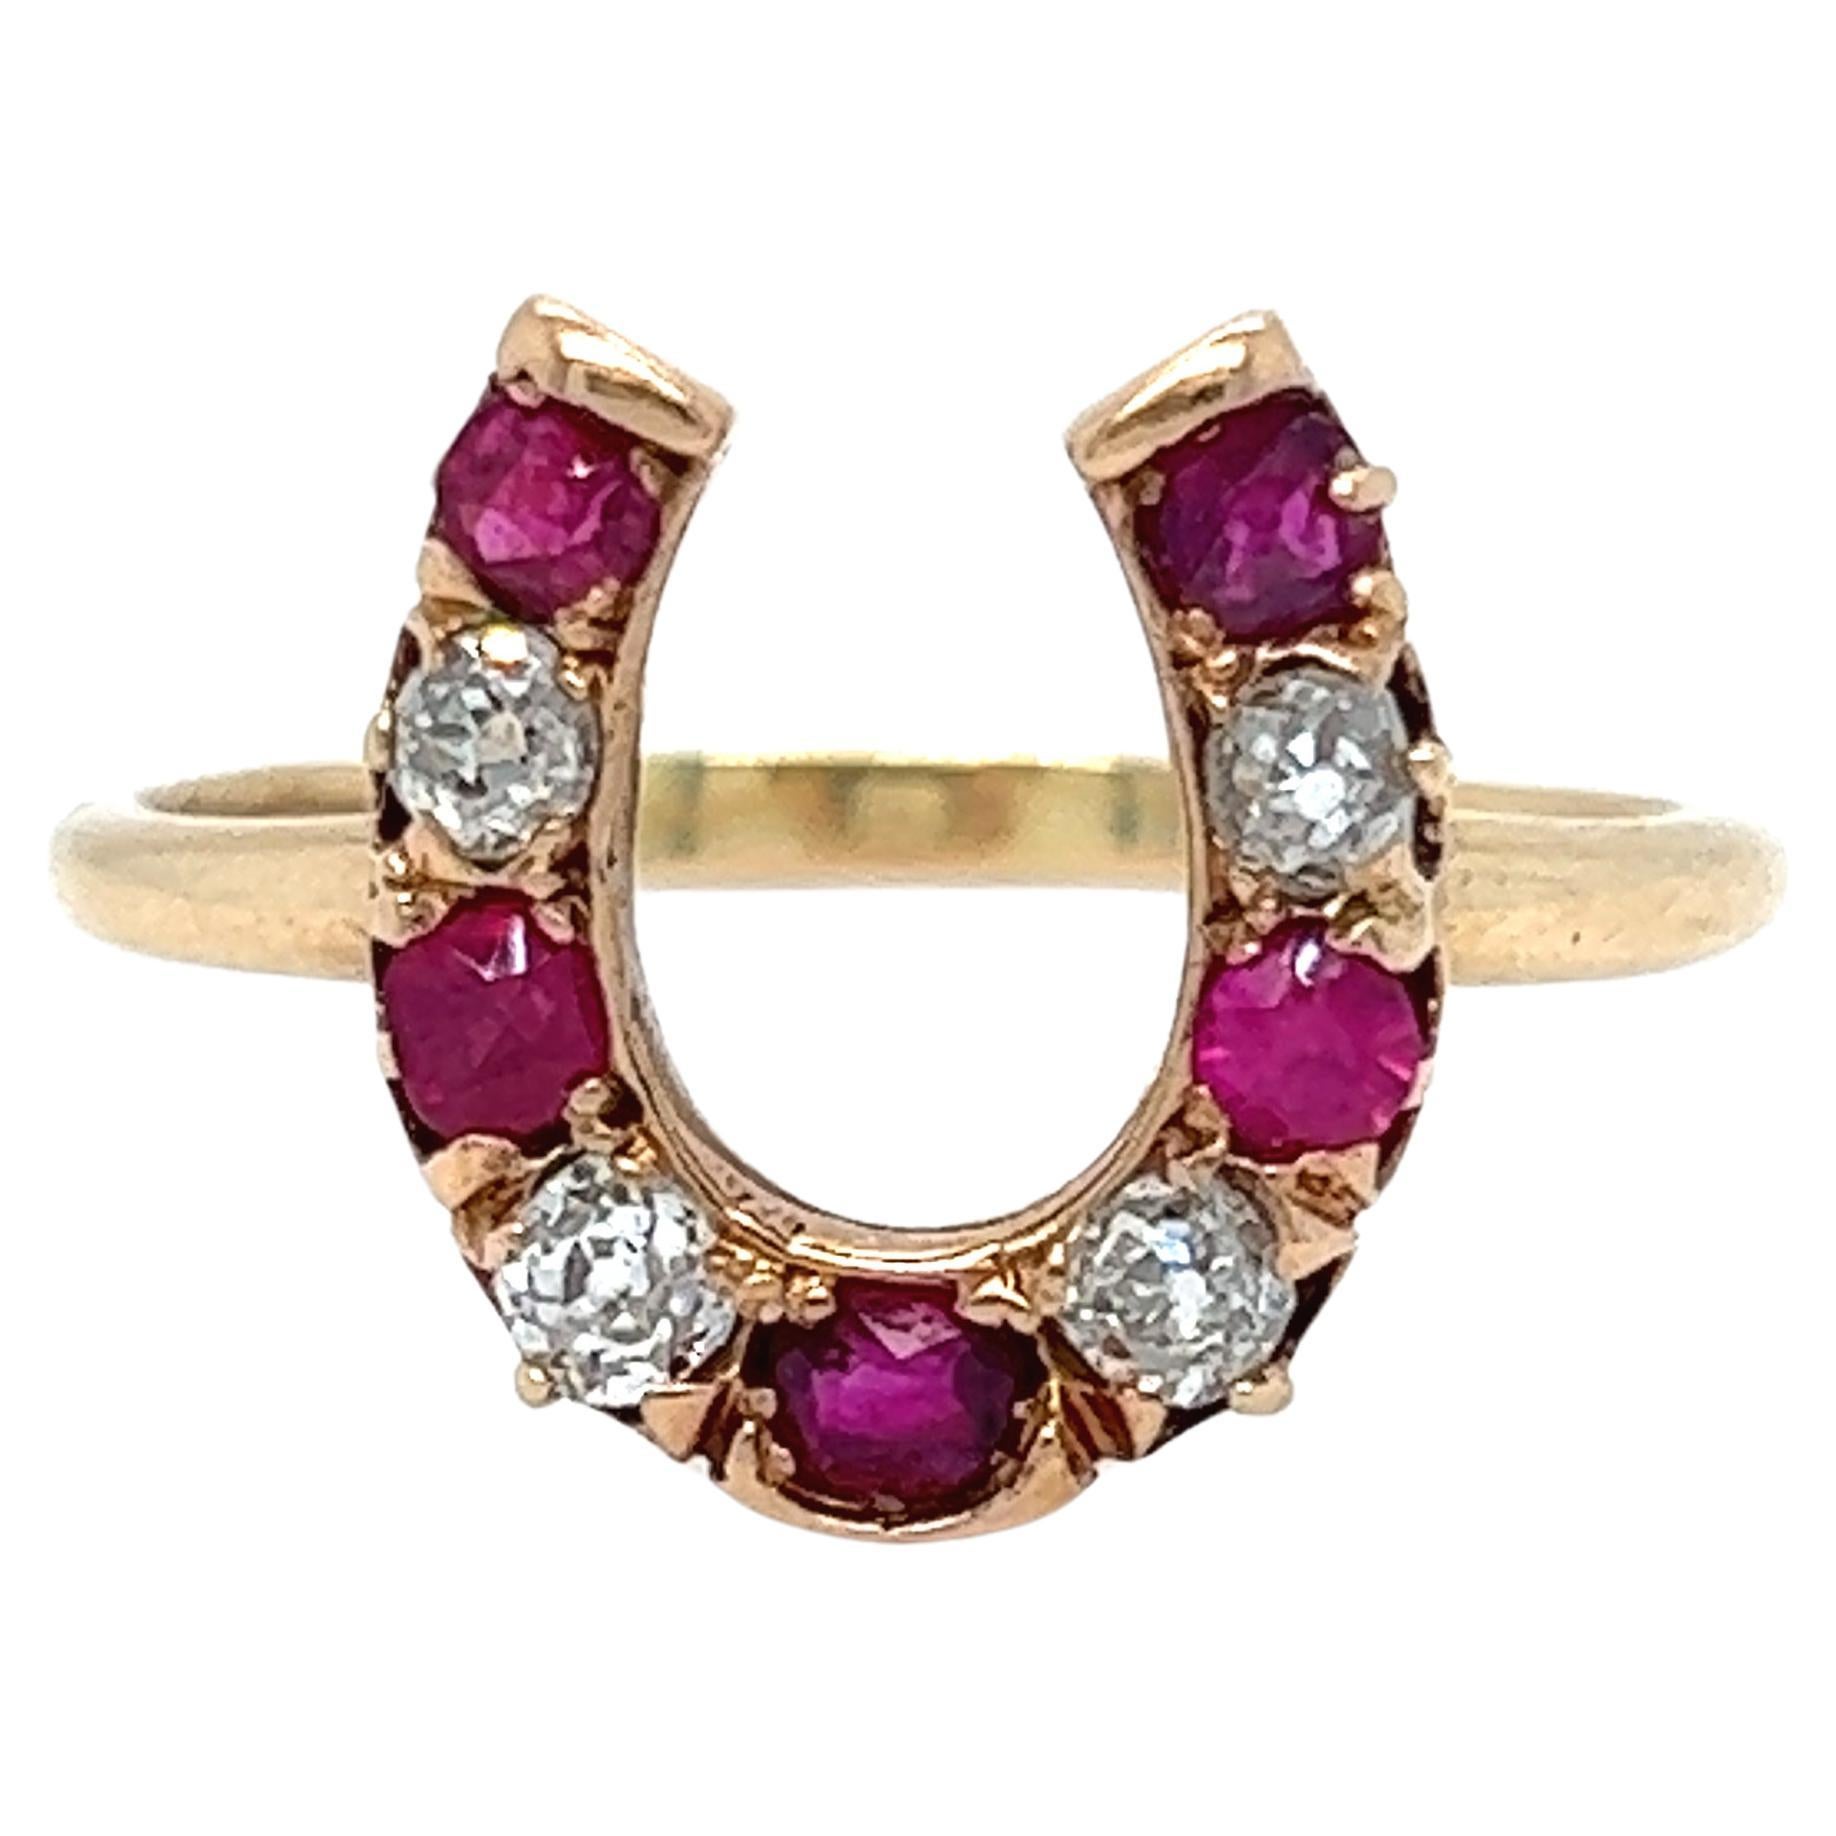 Lucky Vintage Horseshoe Ring in Diamonds, Rubies, and 14K Yellow Gold. For Sale